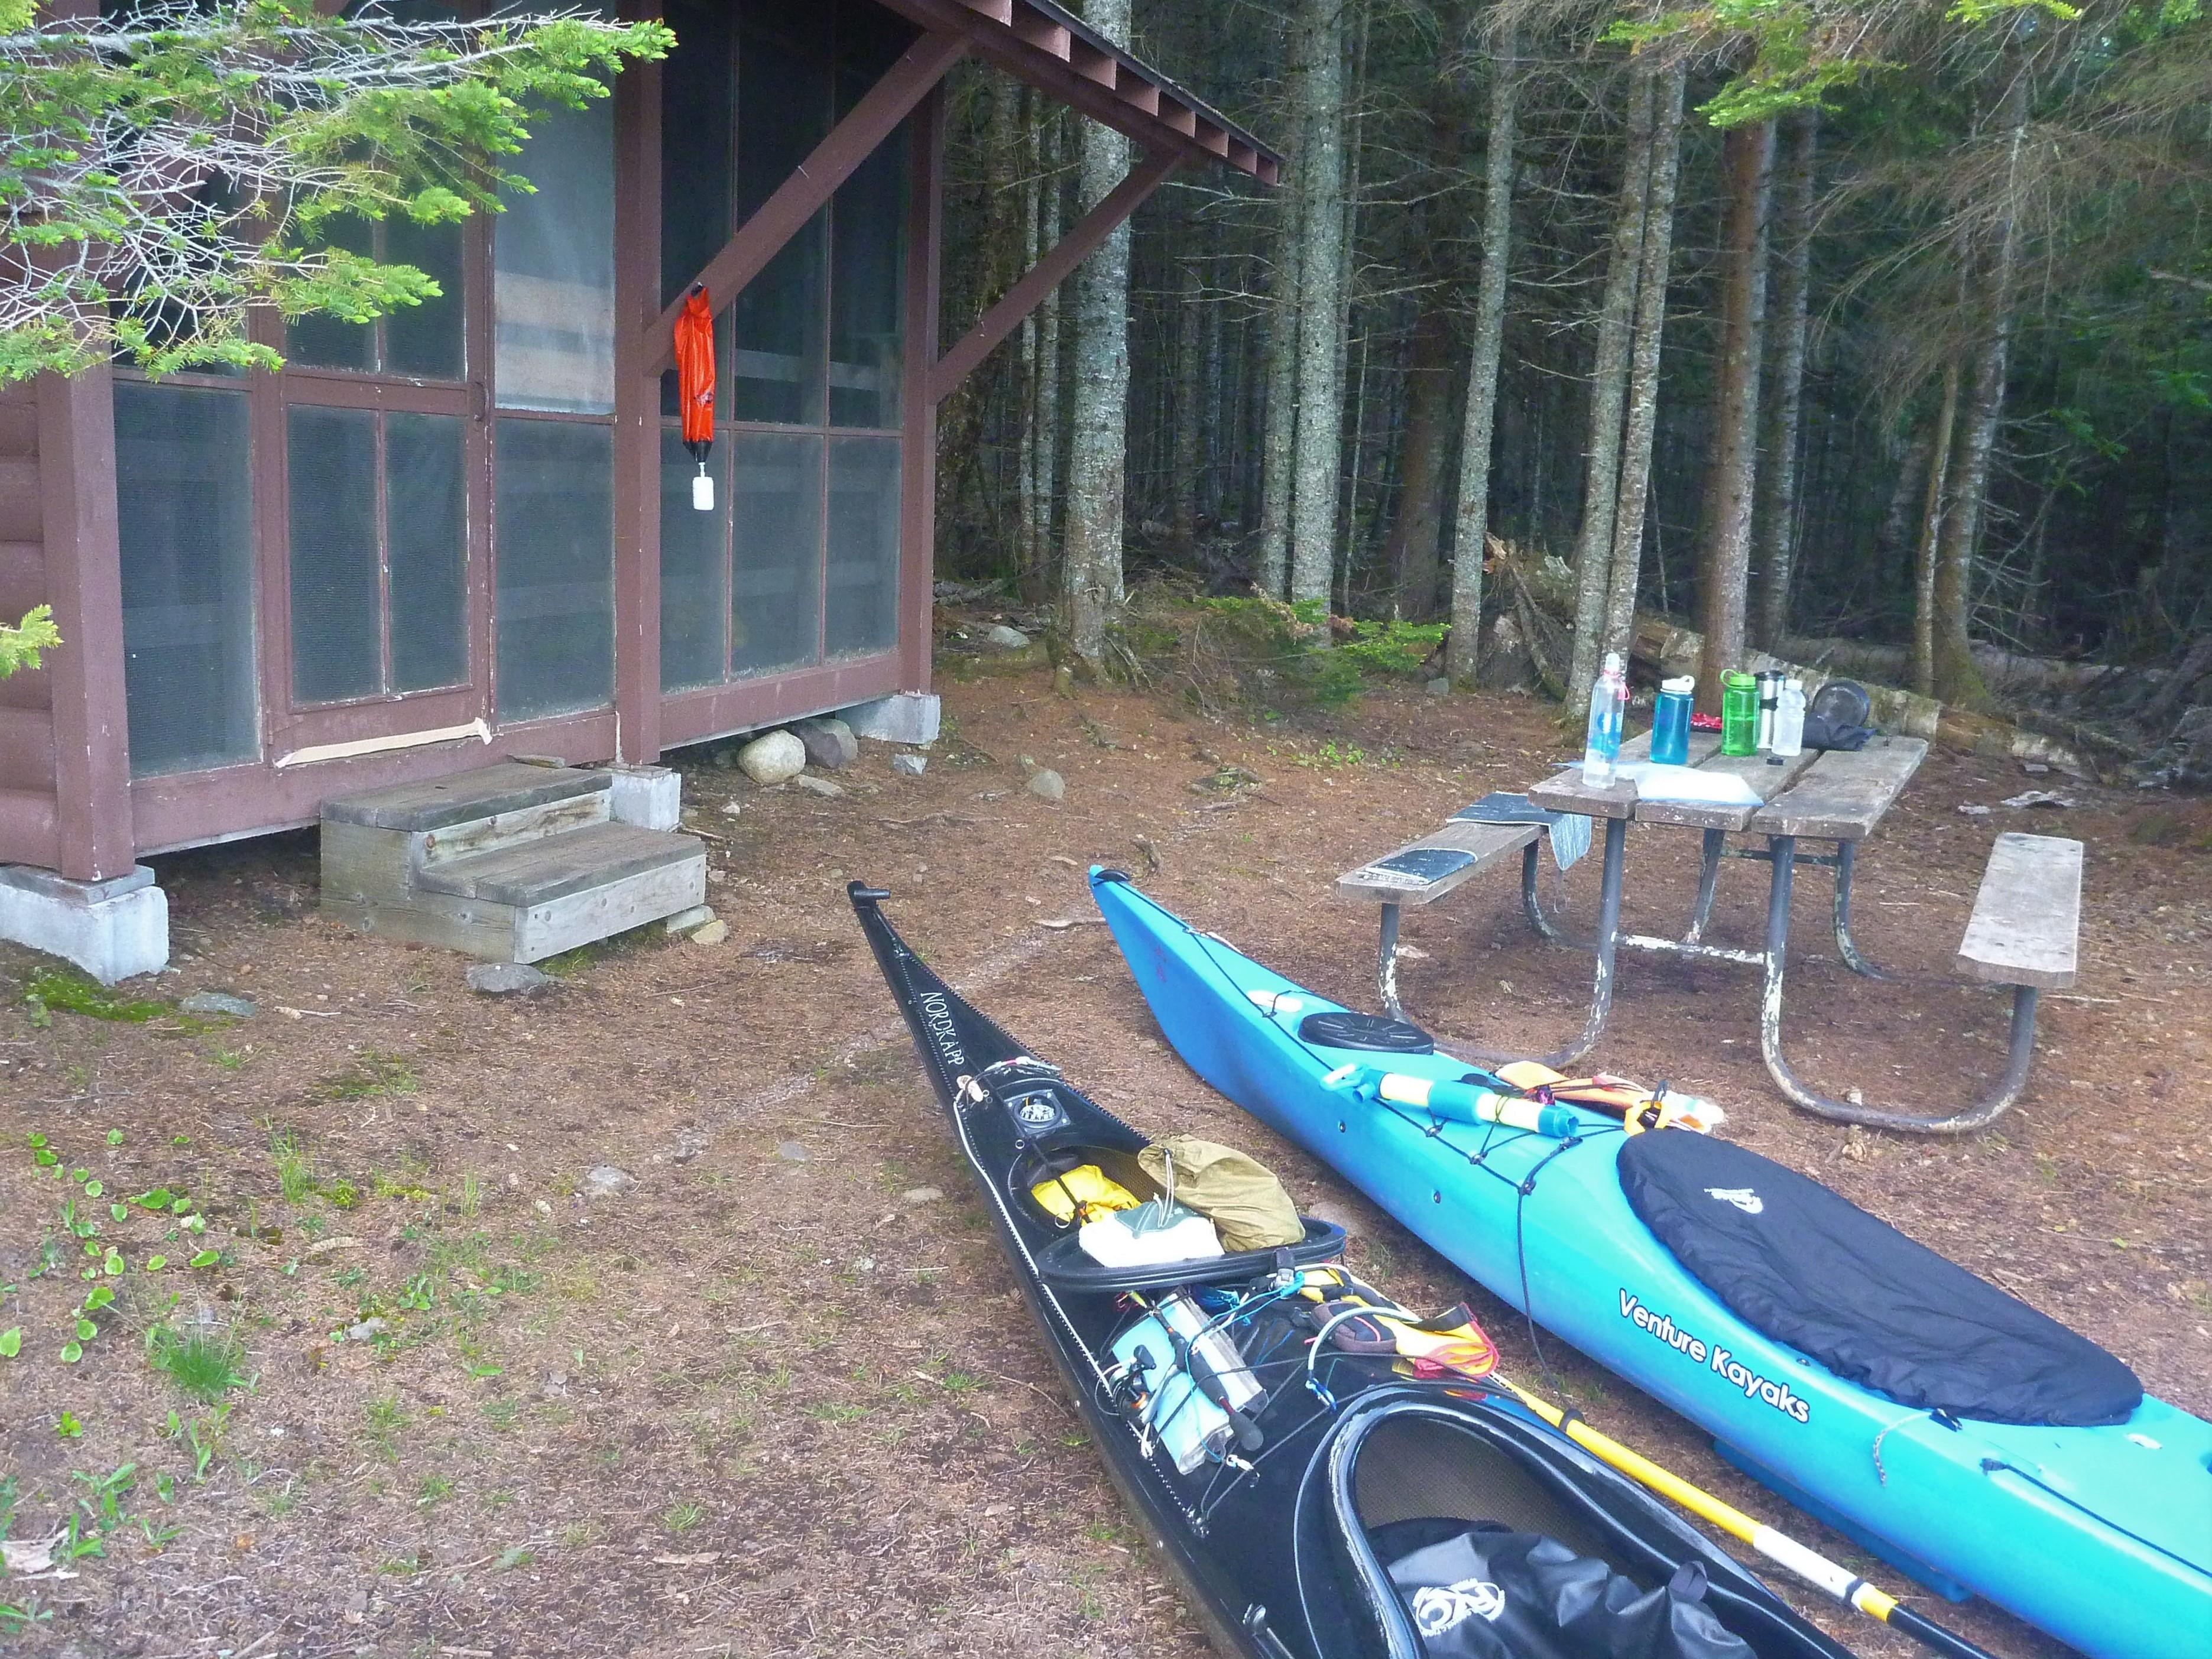 Two kayaks rest in front of a campground shelter.